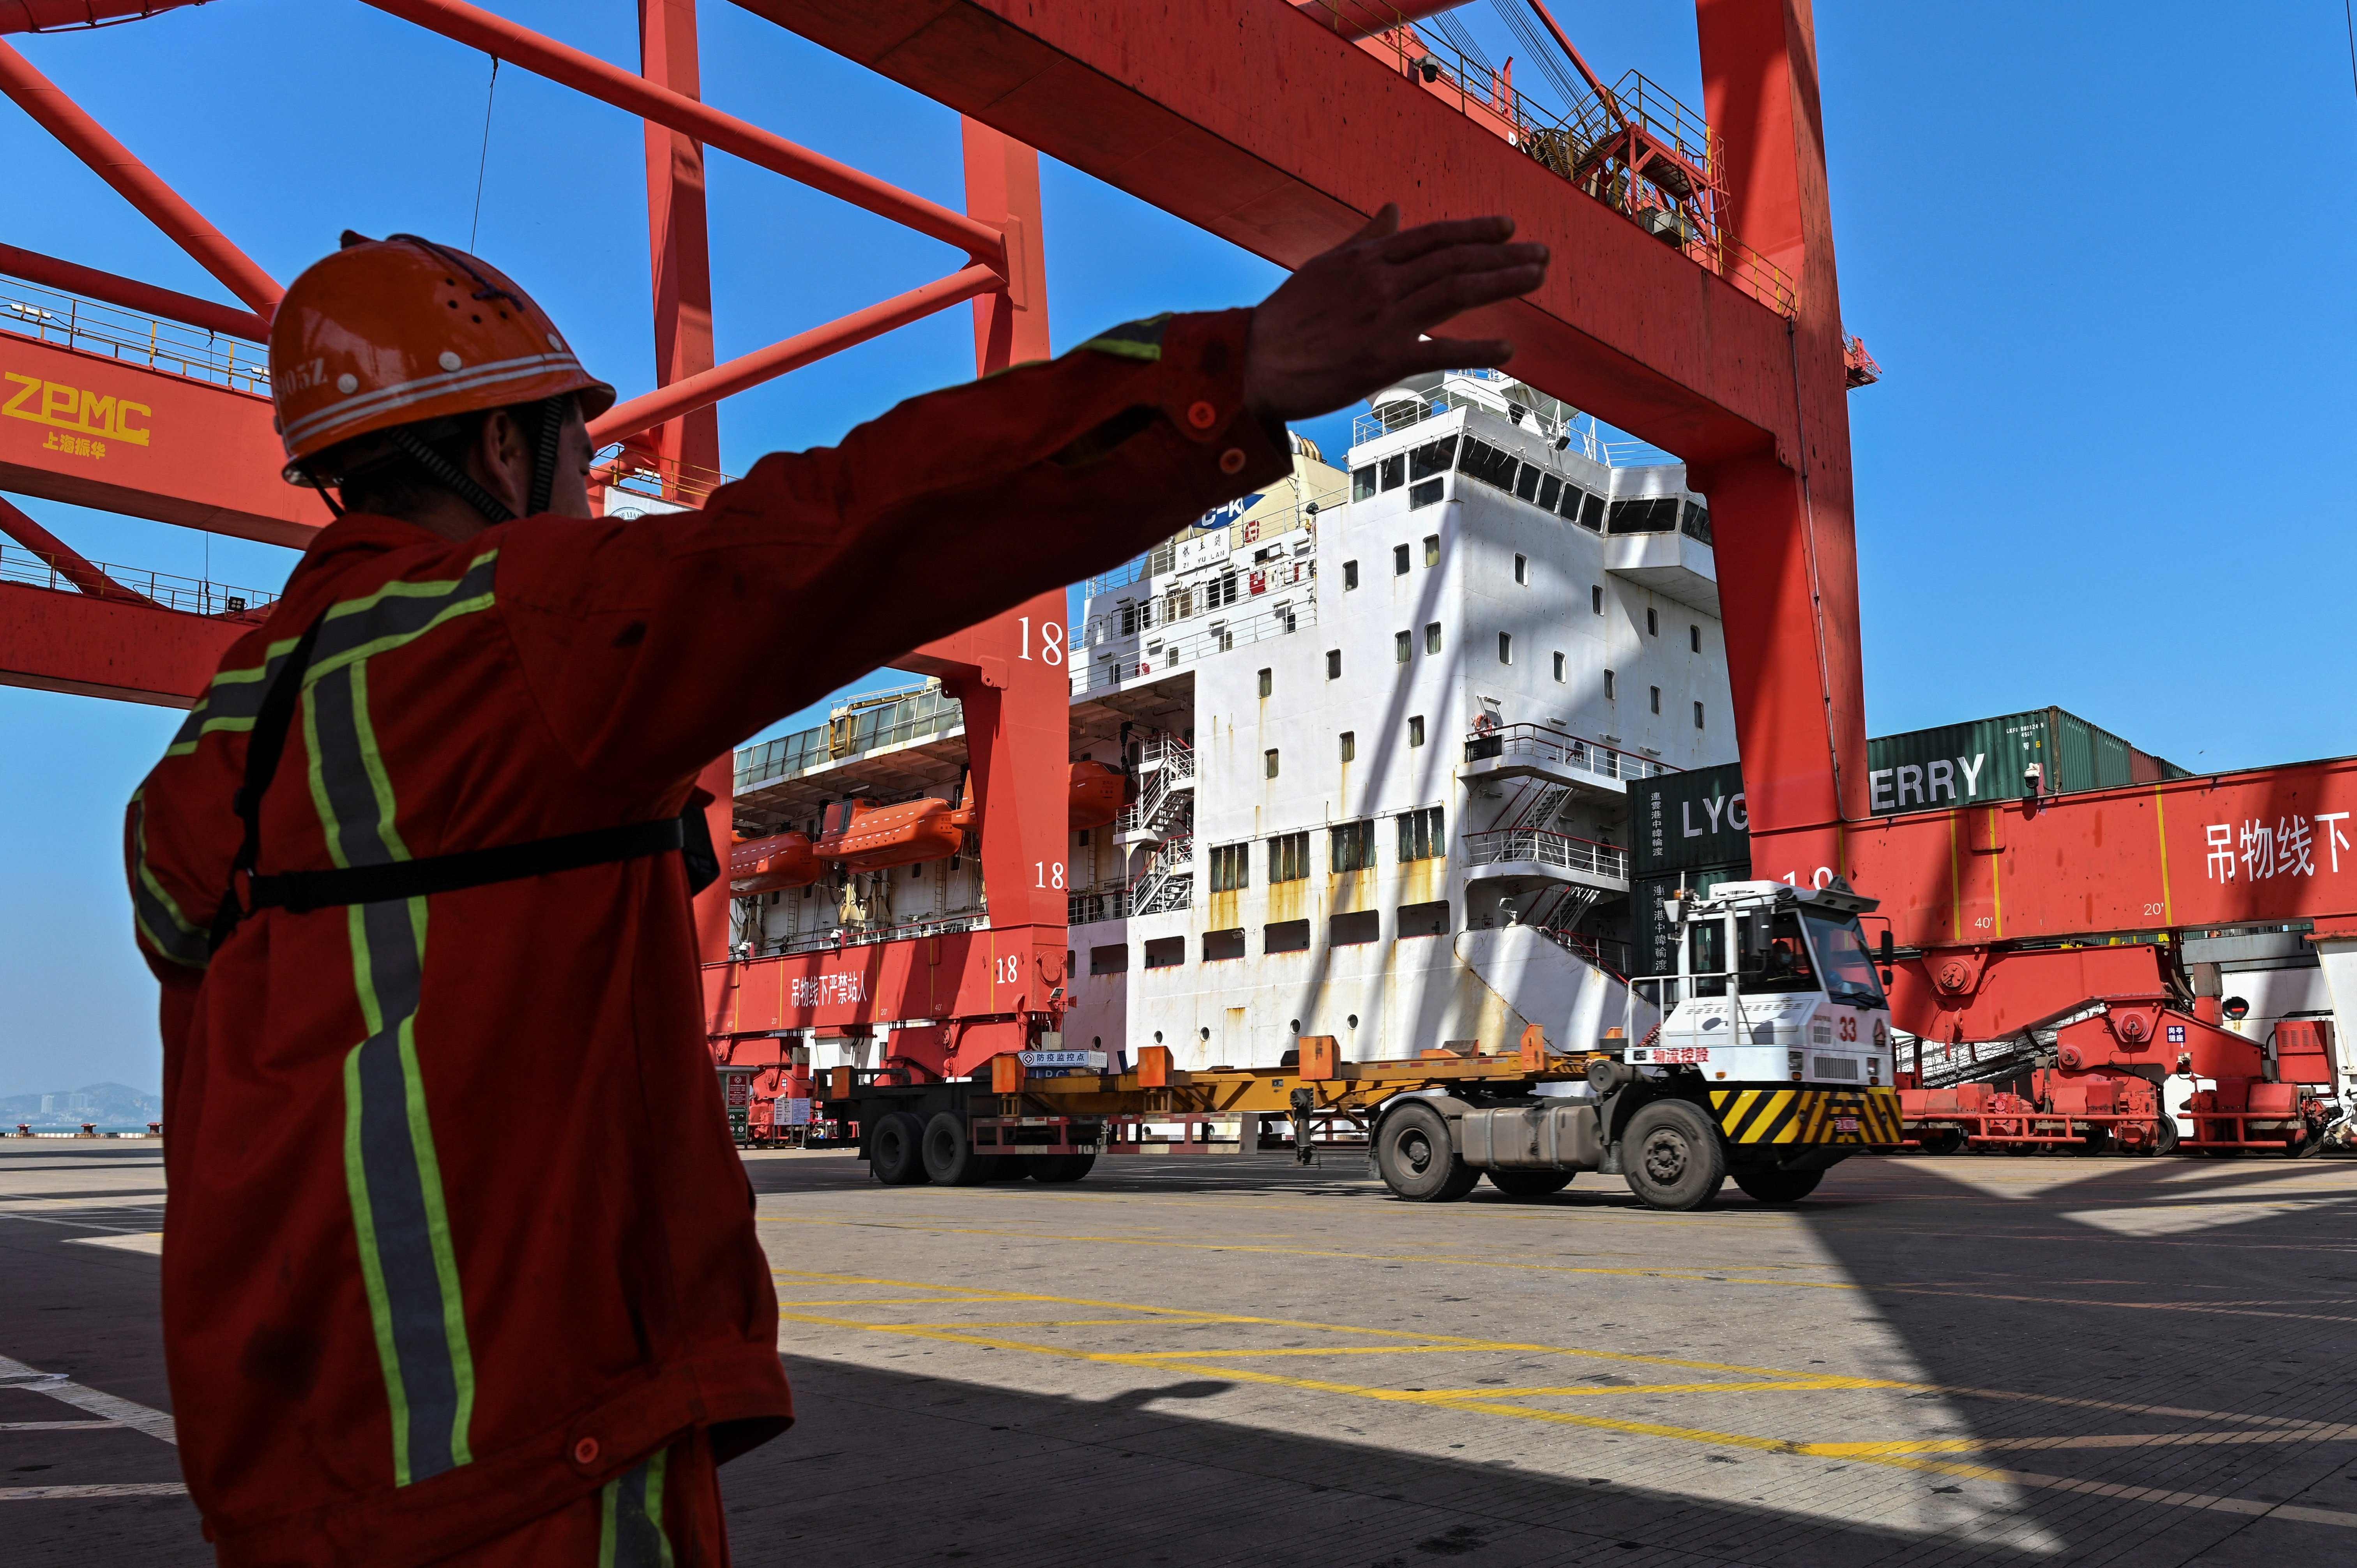 A worker gestures while a crane prepares to load a container onto a truck in Lianyungang, Jiangsu province on March 24. China’s exports rose in March as demand picked up in key overseas markets, including the US. Photo: AFP